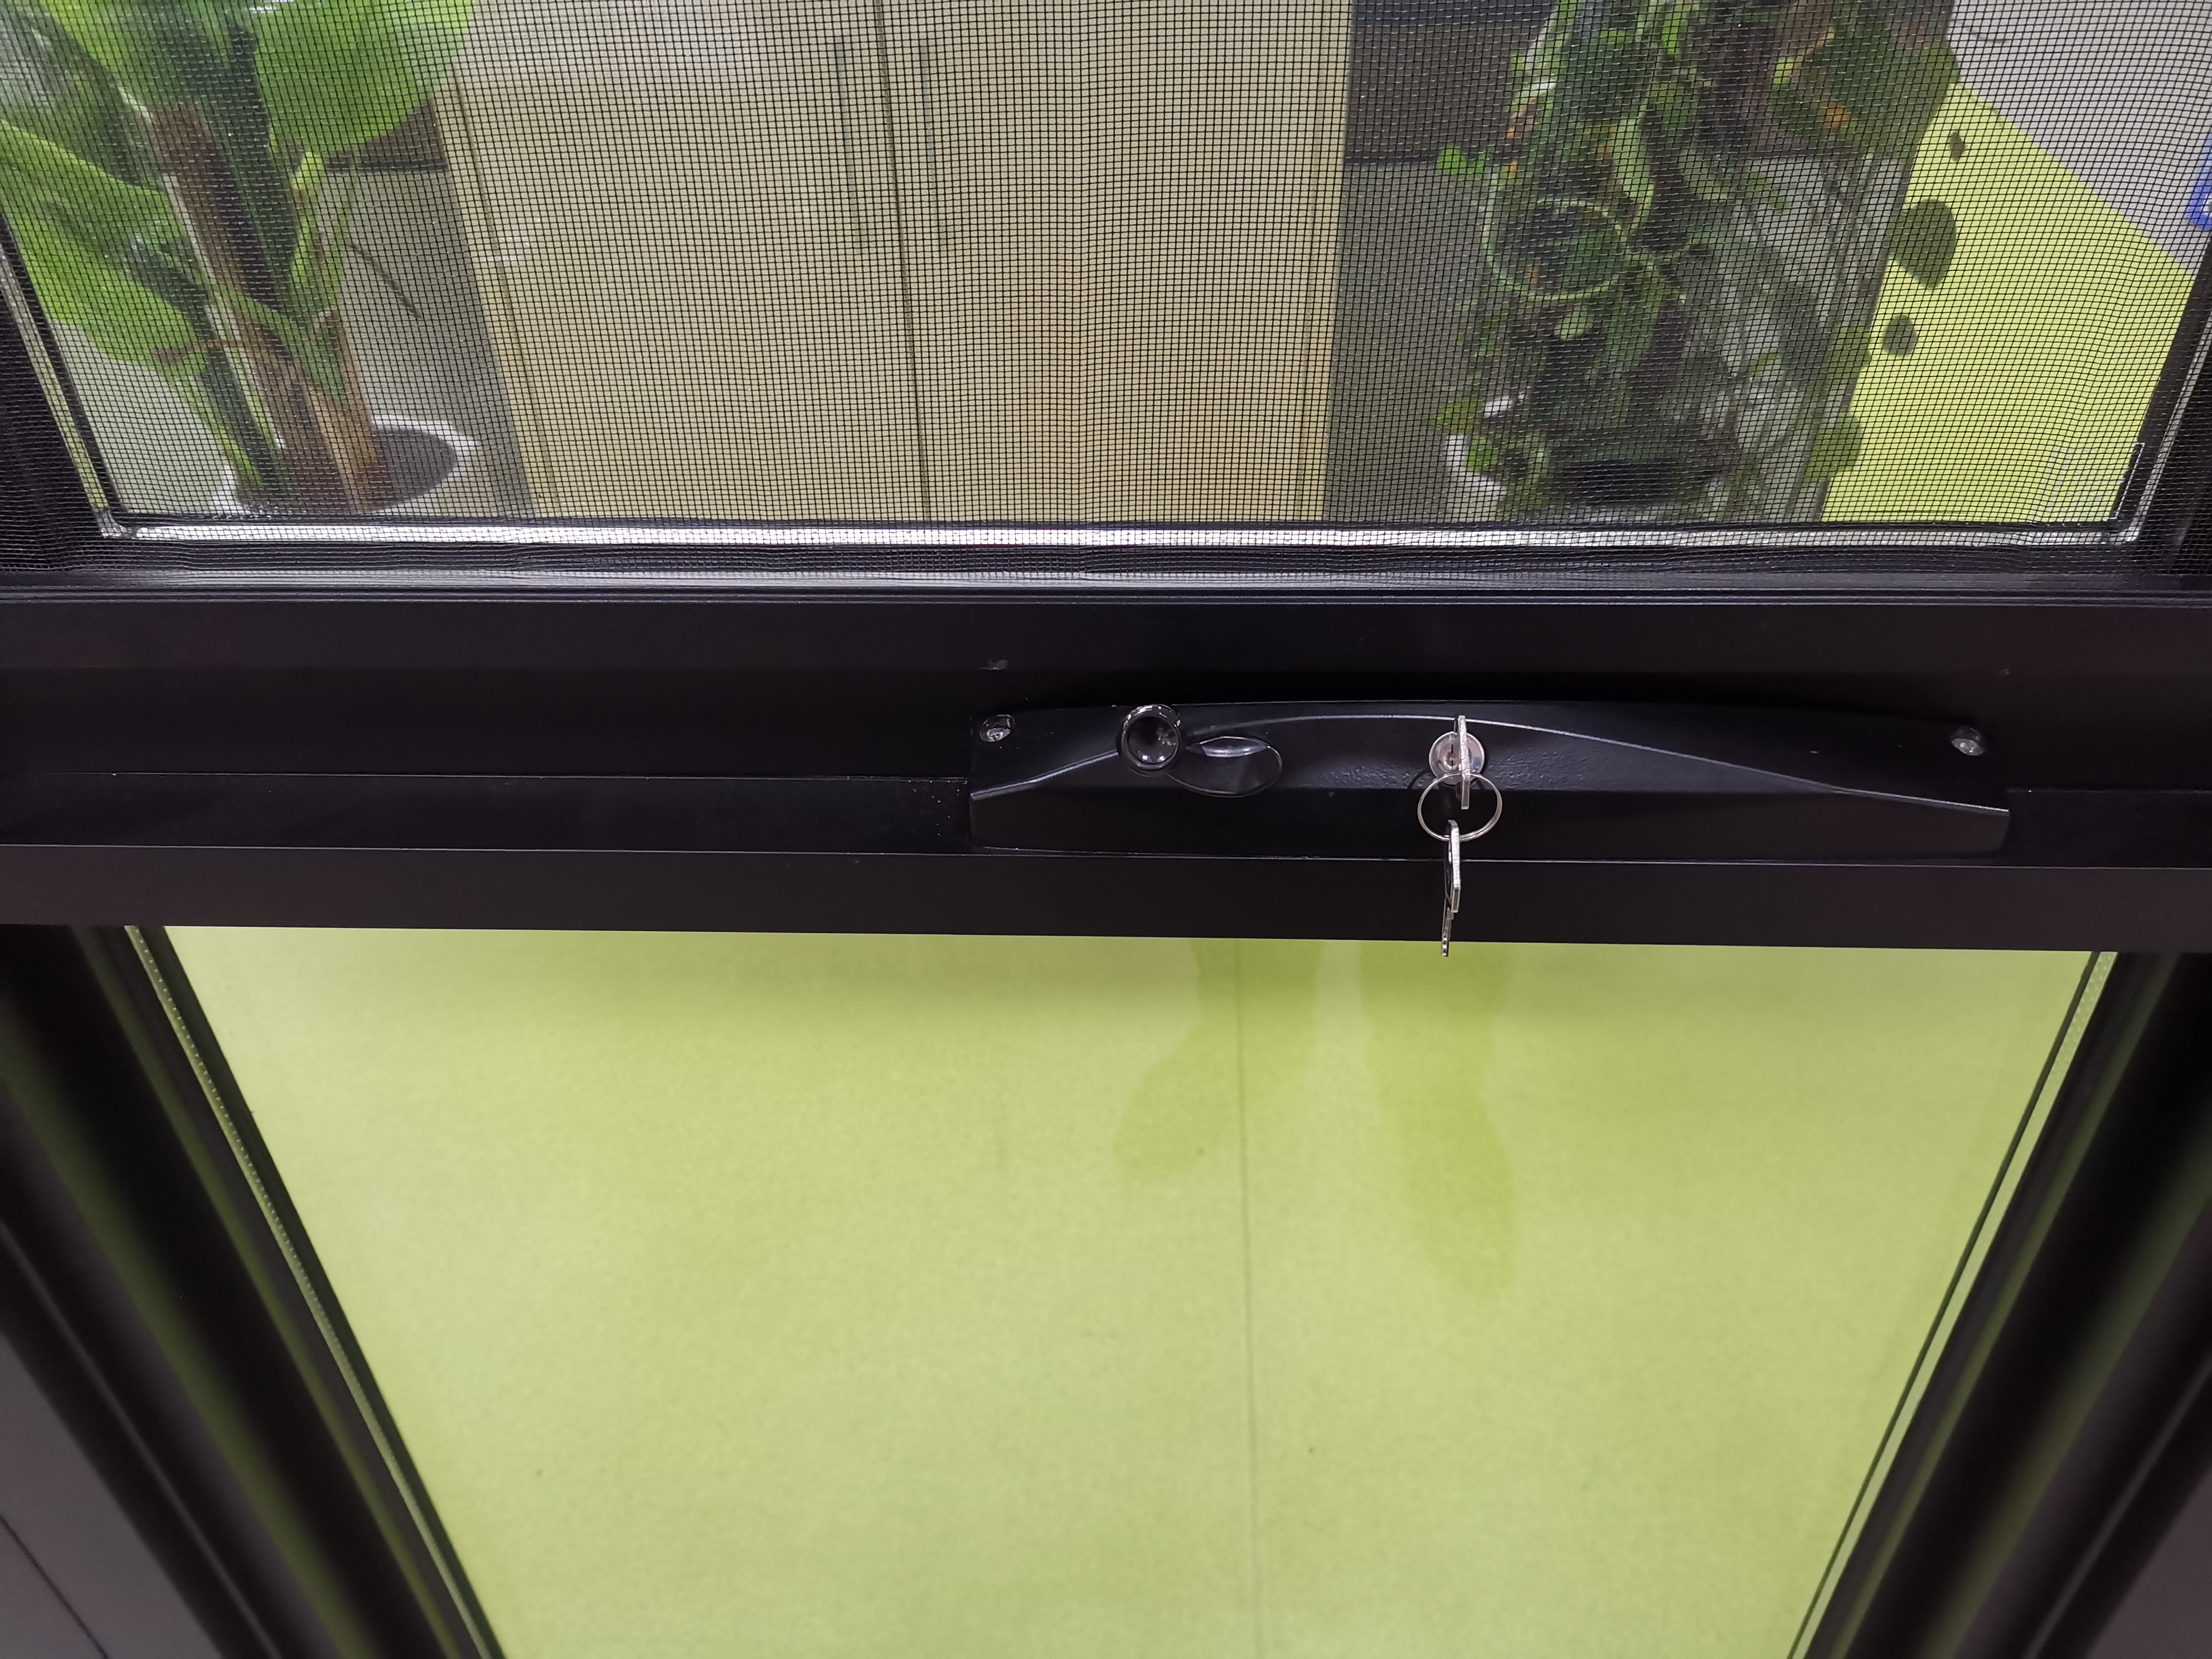 AS2047 Awning Window with Winder Chain Lock